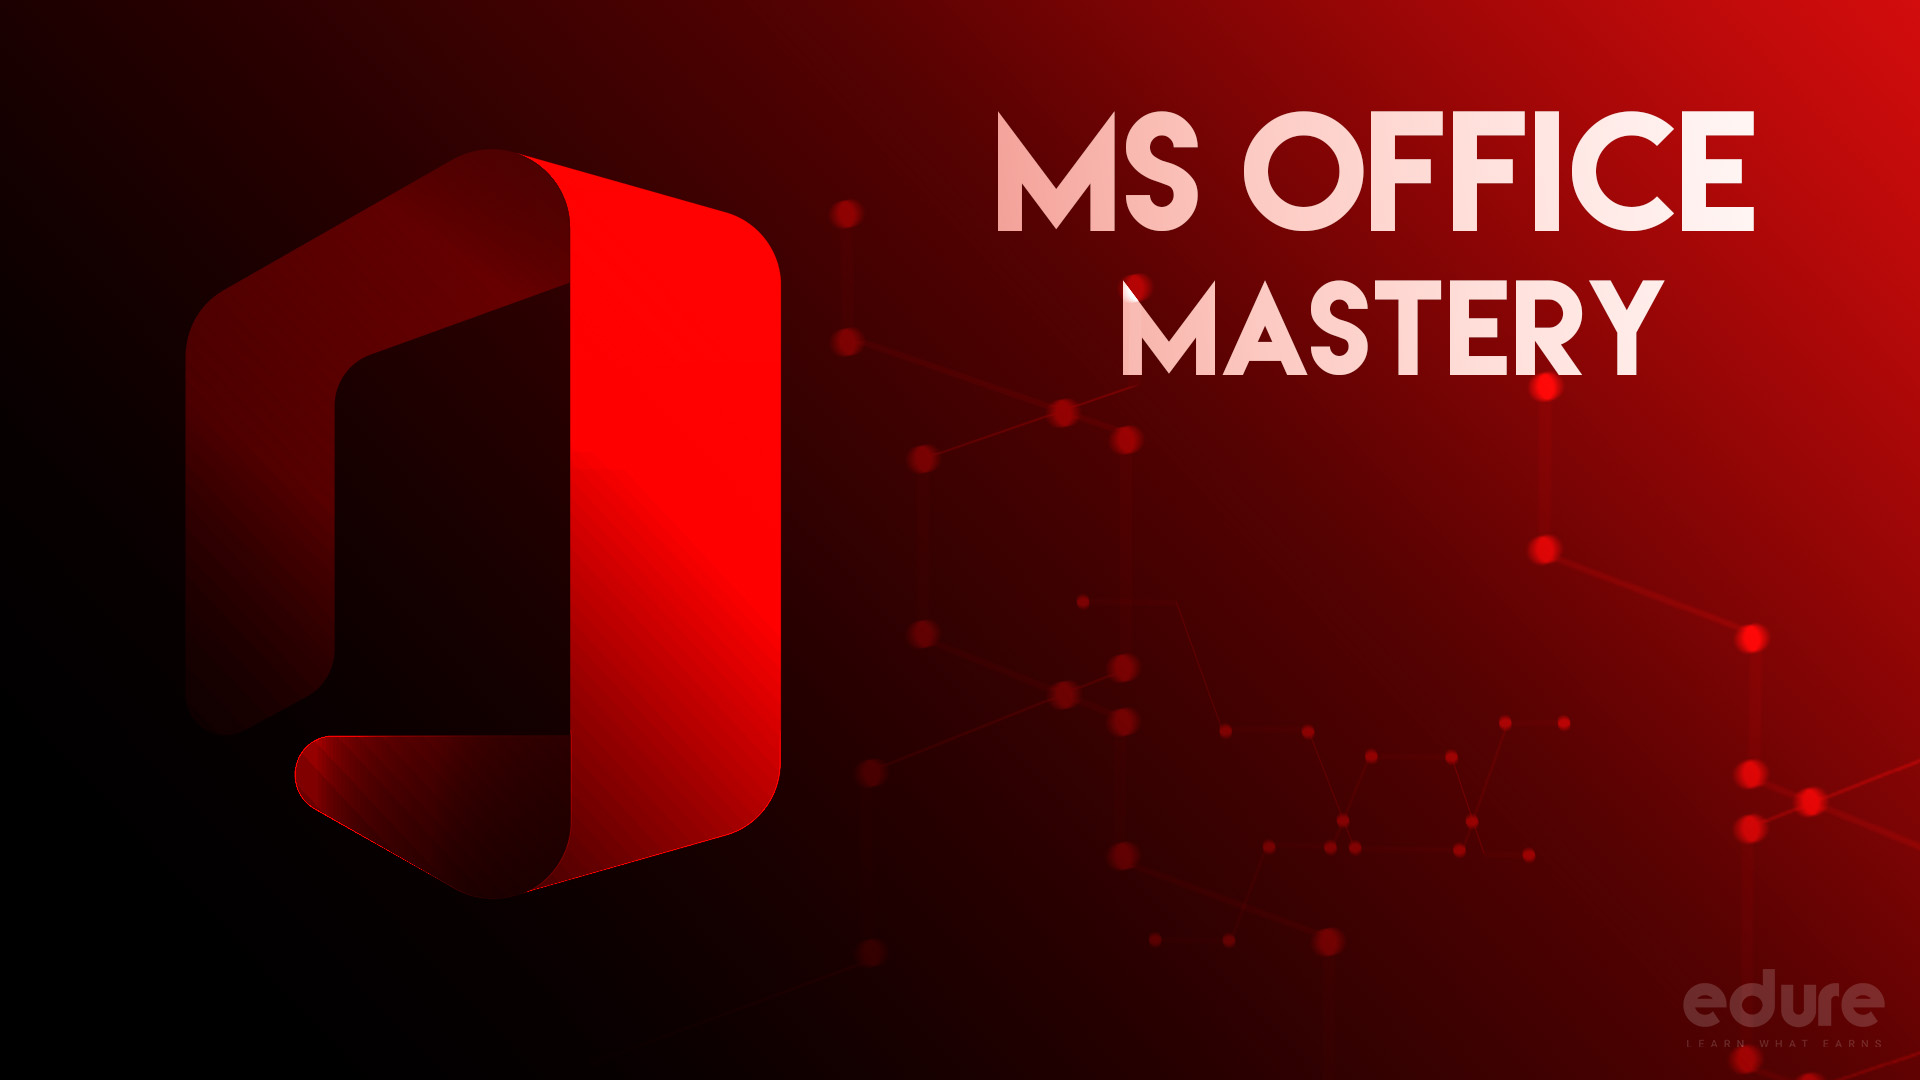 MS OFFICE COMPLETE MASTERY